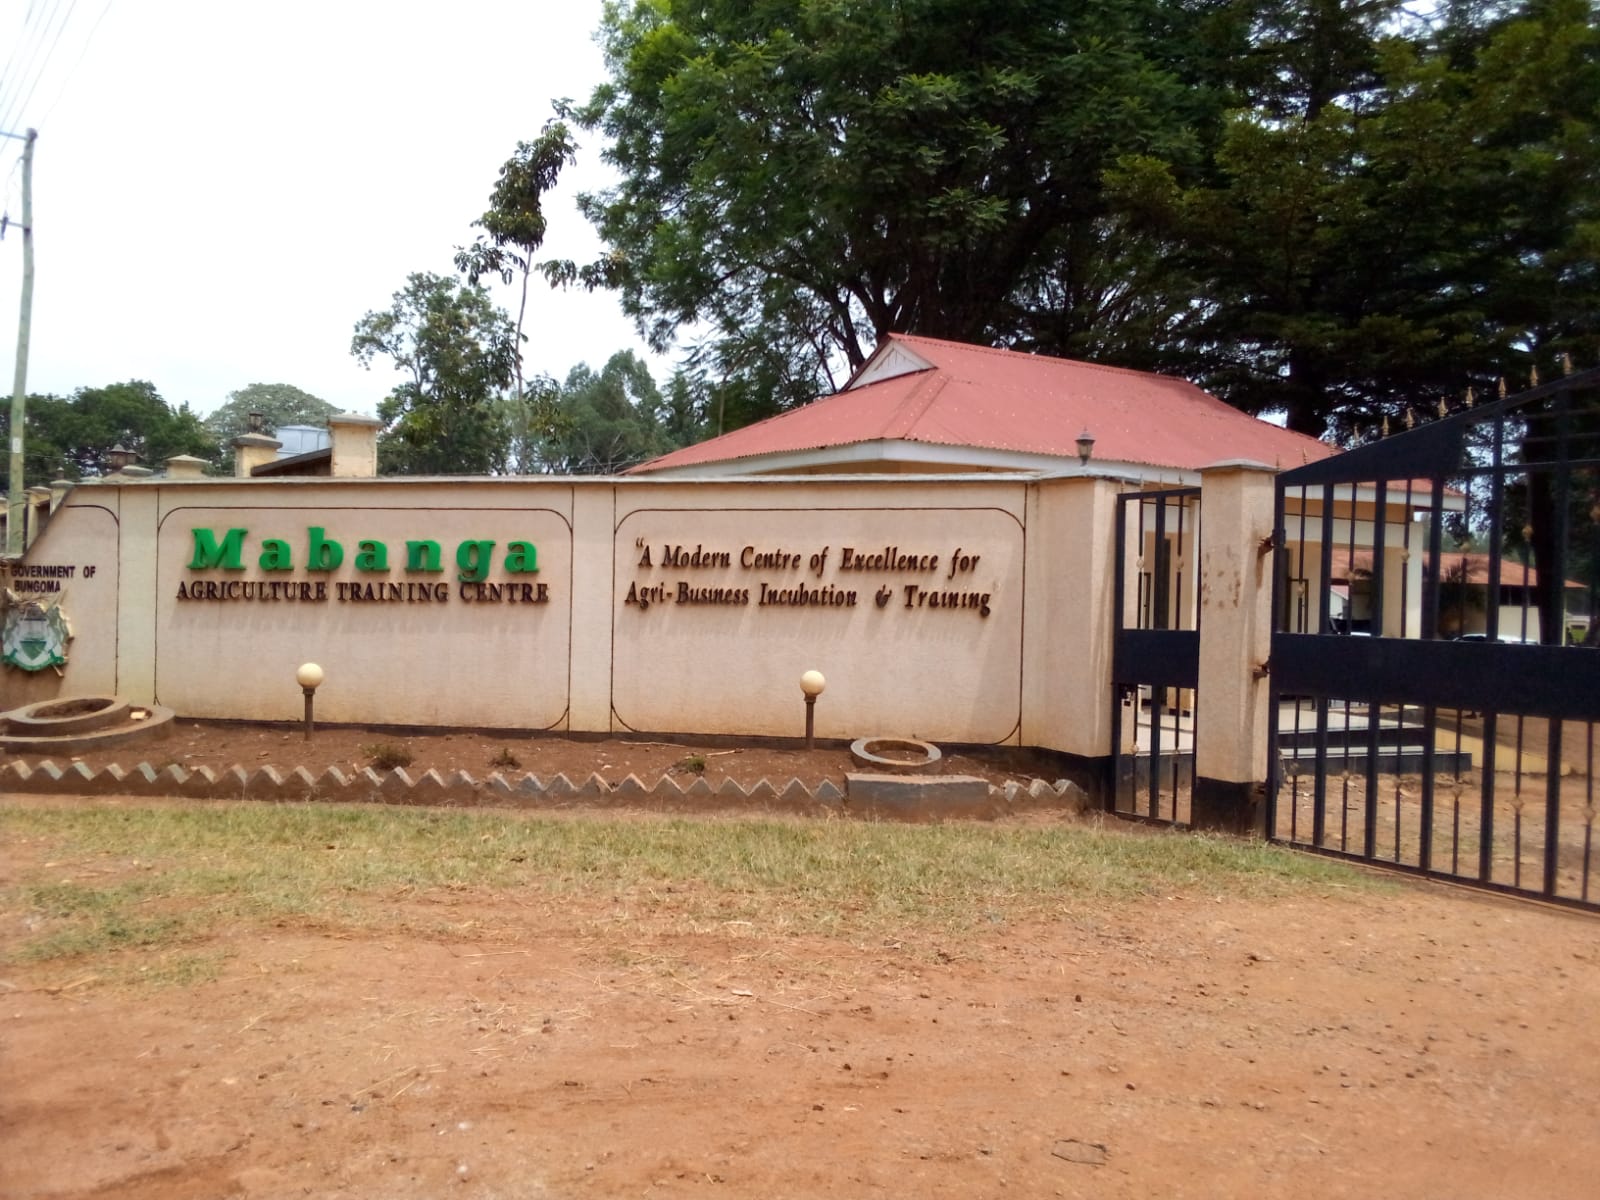 Mabanga Agricultural Training Center